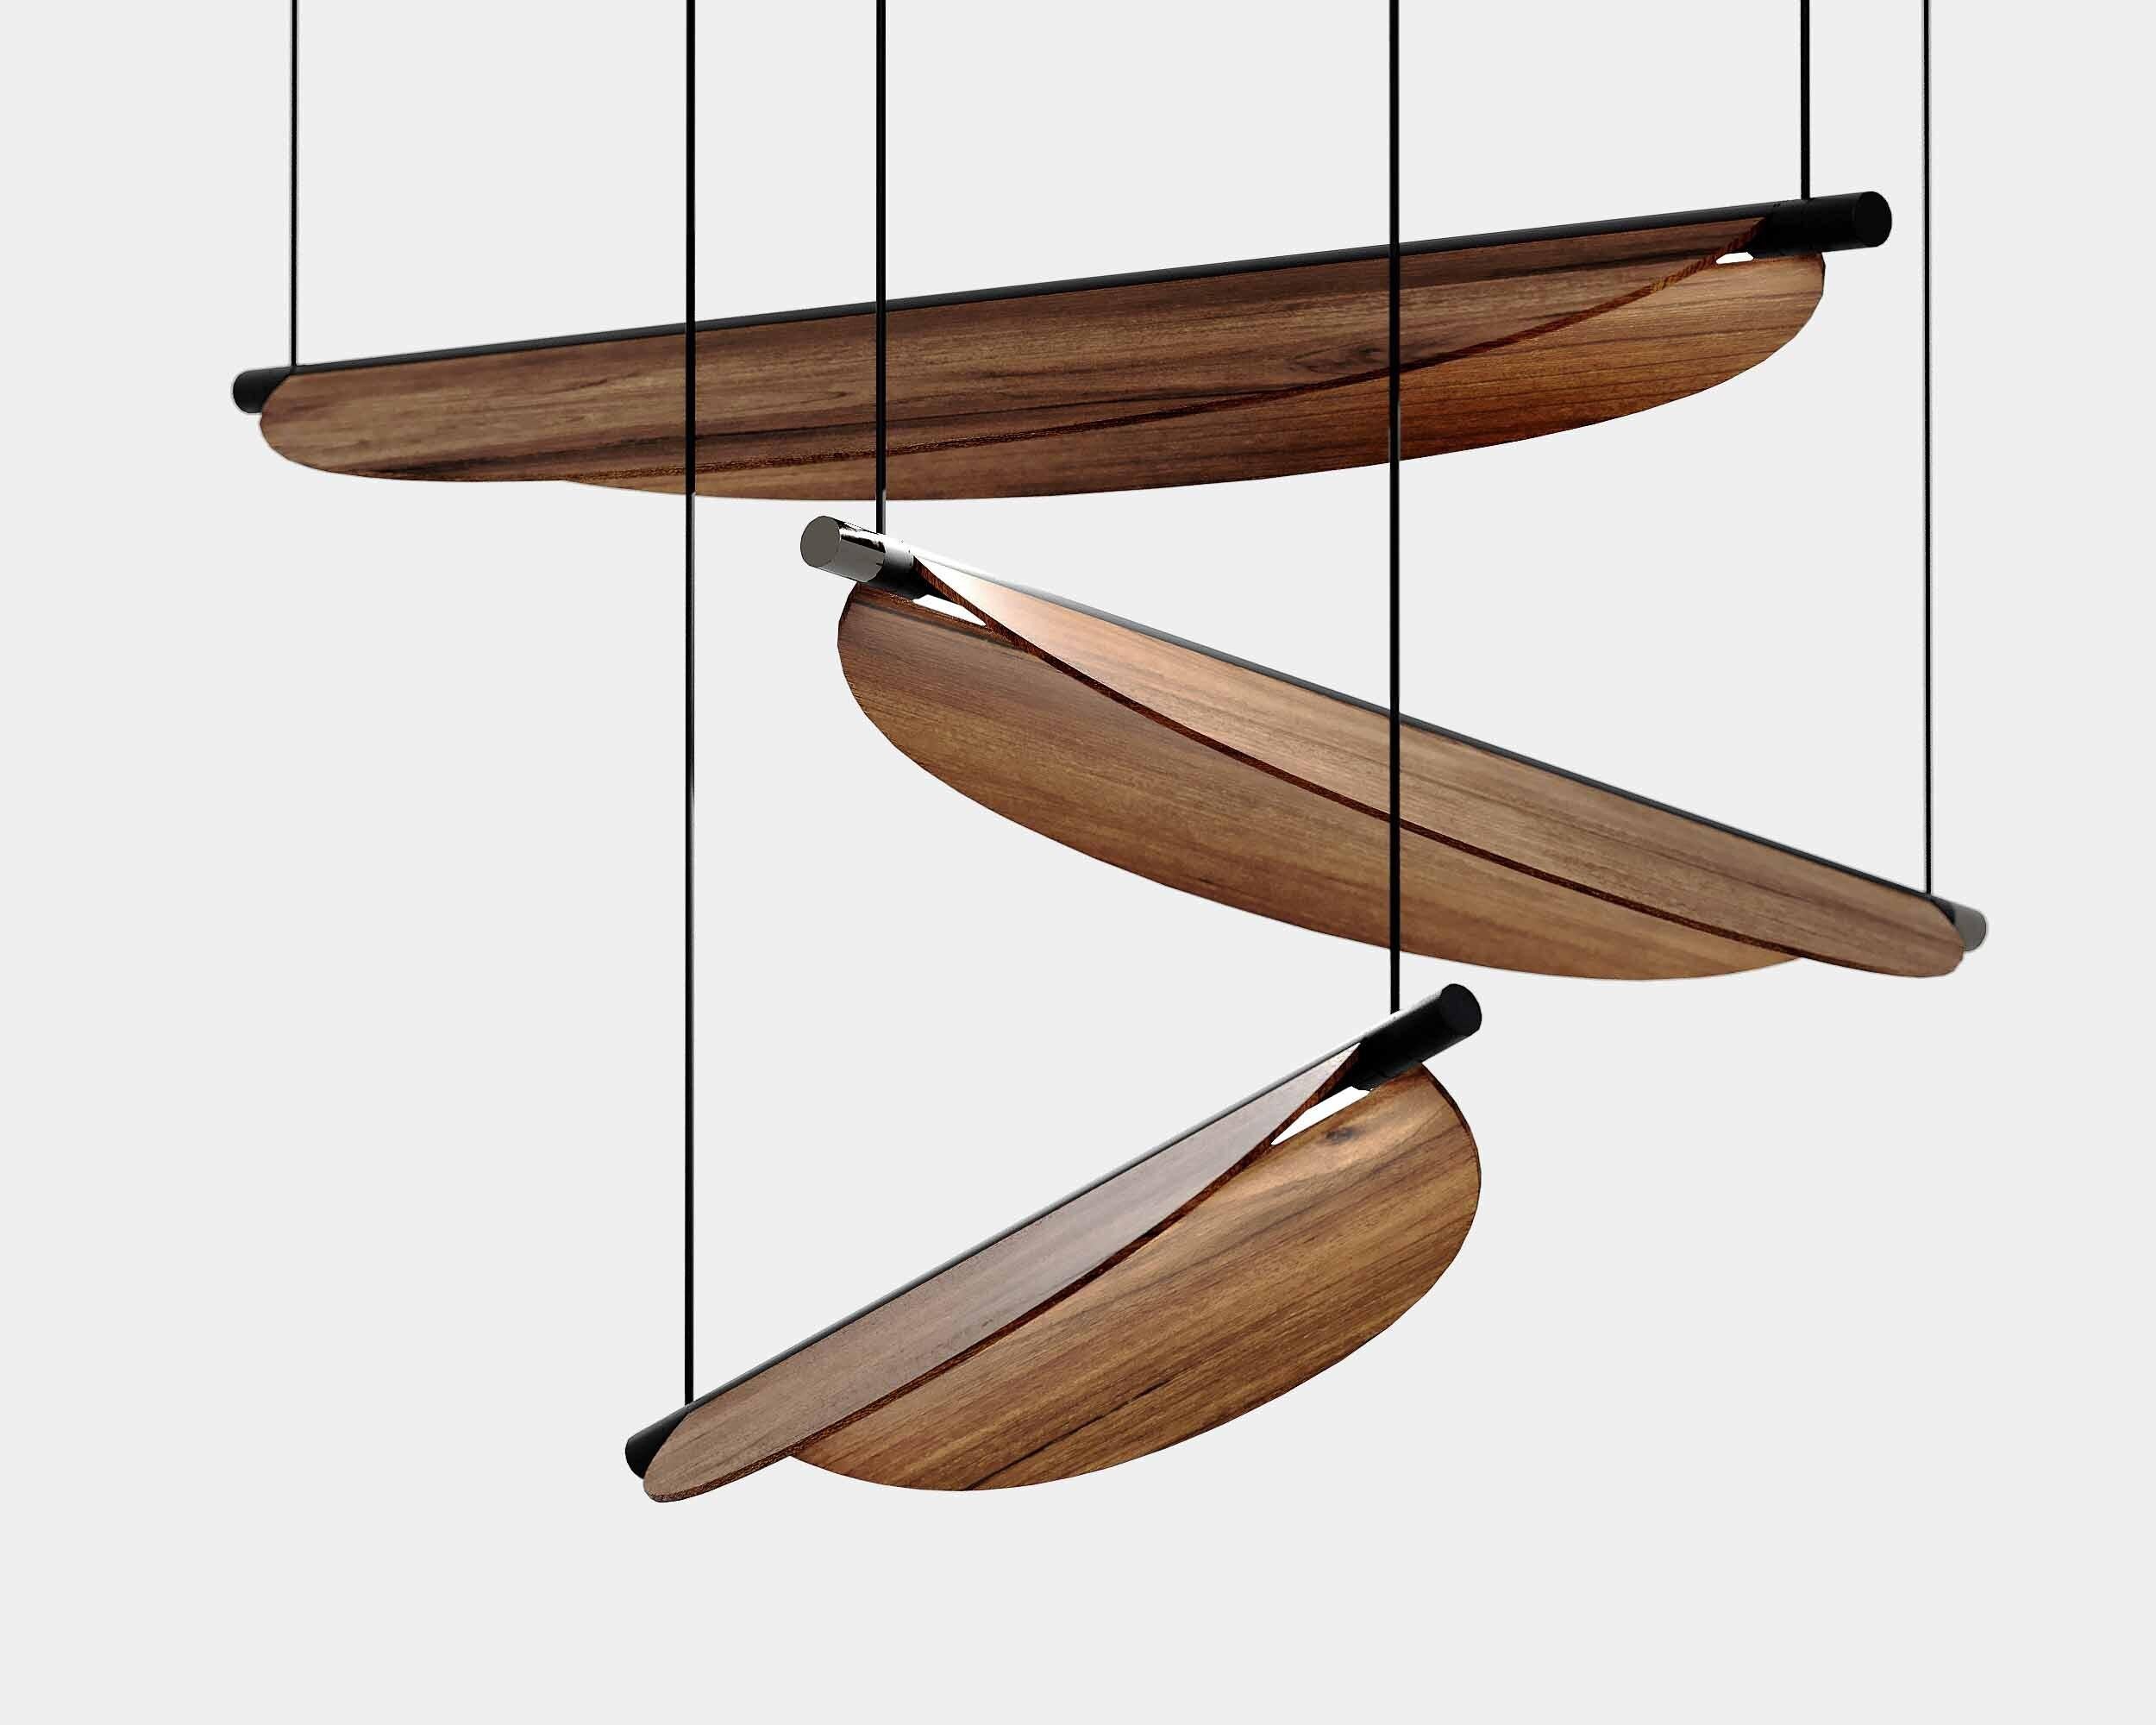 Thula 562.23 by Frederica Biasi x Tooy
Pendant amp compliant with US electric system

(Sold individually, price only for large pendant)

Dimensions: 
Small : H 11 x W. 67 x D. 25 cm
Medium : H 11 x W. 104 x D. 25 cm 
Large : H 11 x W. 134 x D. 25 cm